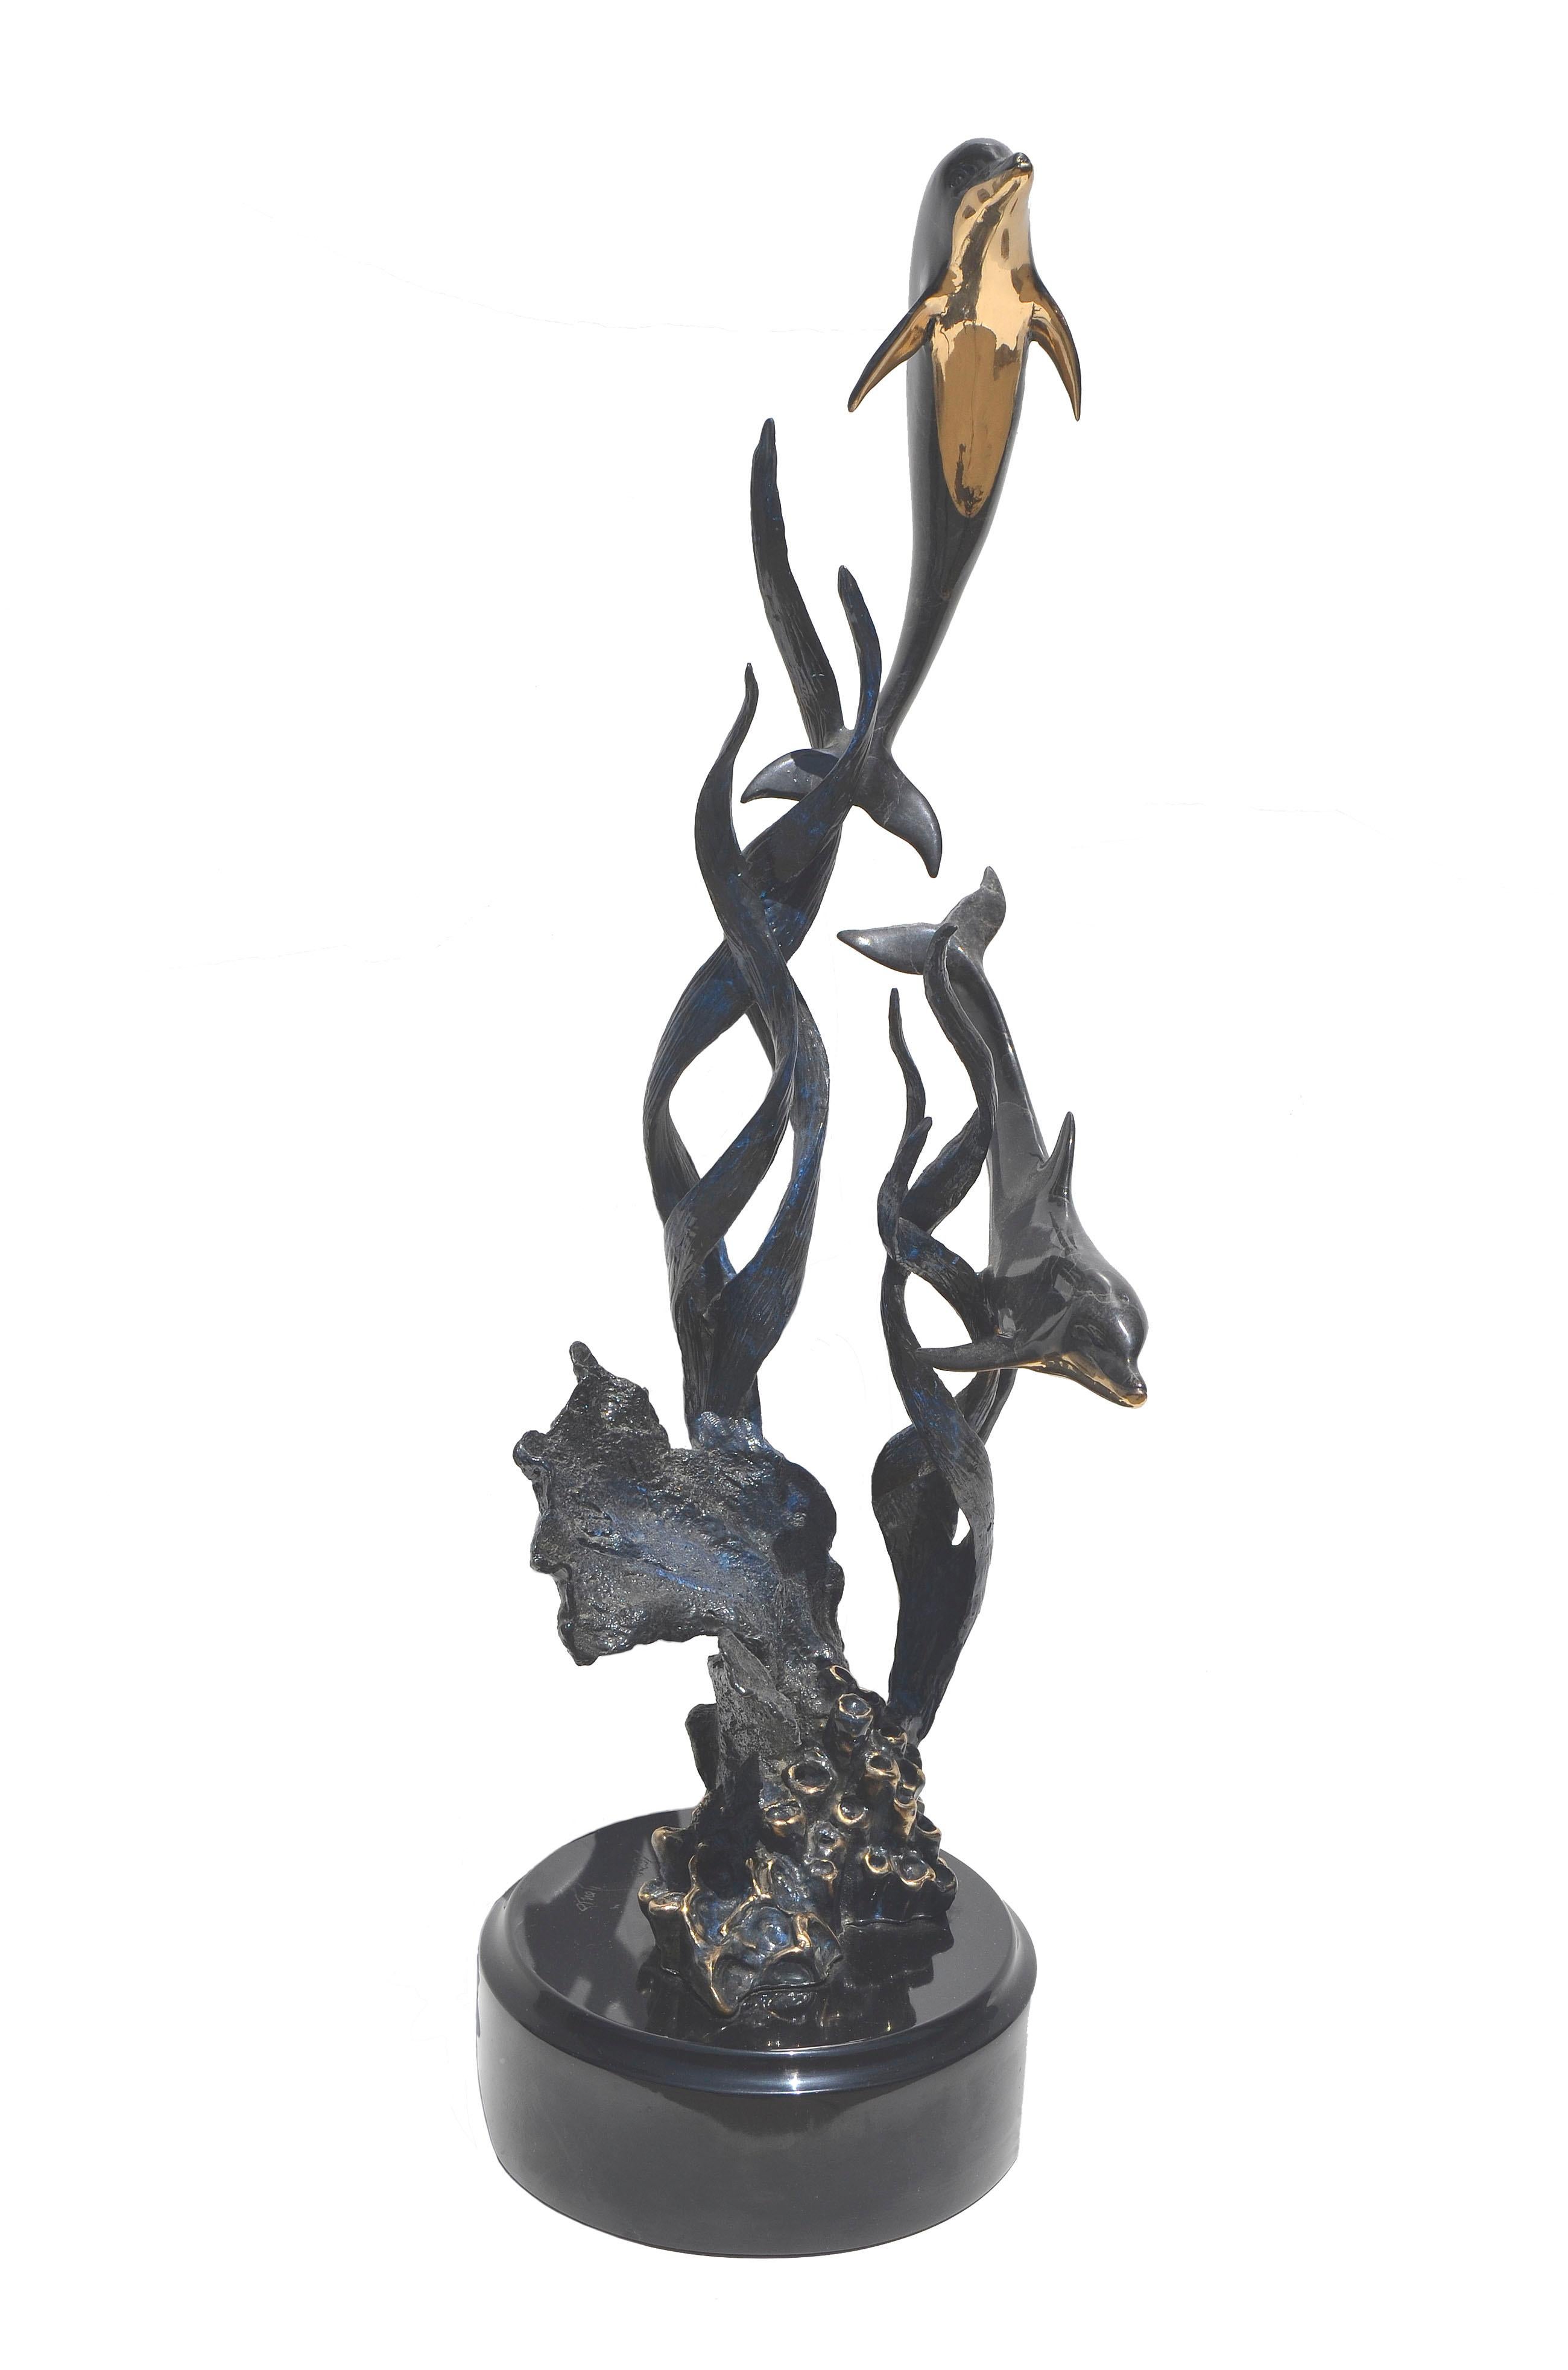 Beautiful bronze sculpture of two dolphins swimming in a kelp and coral environment. Beautiful viewing 360 degrees. Presented on a black lacquer base. Artist's signature and edition number etched into base: 